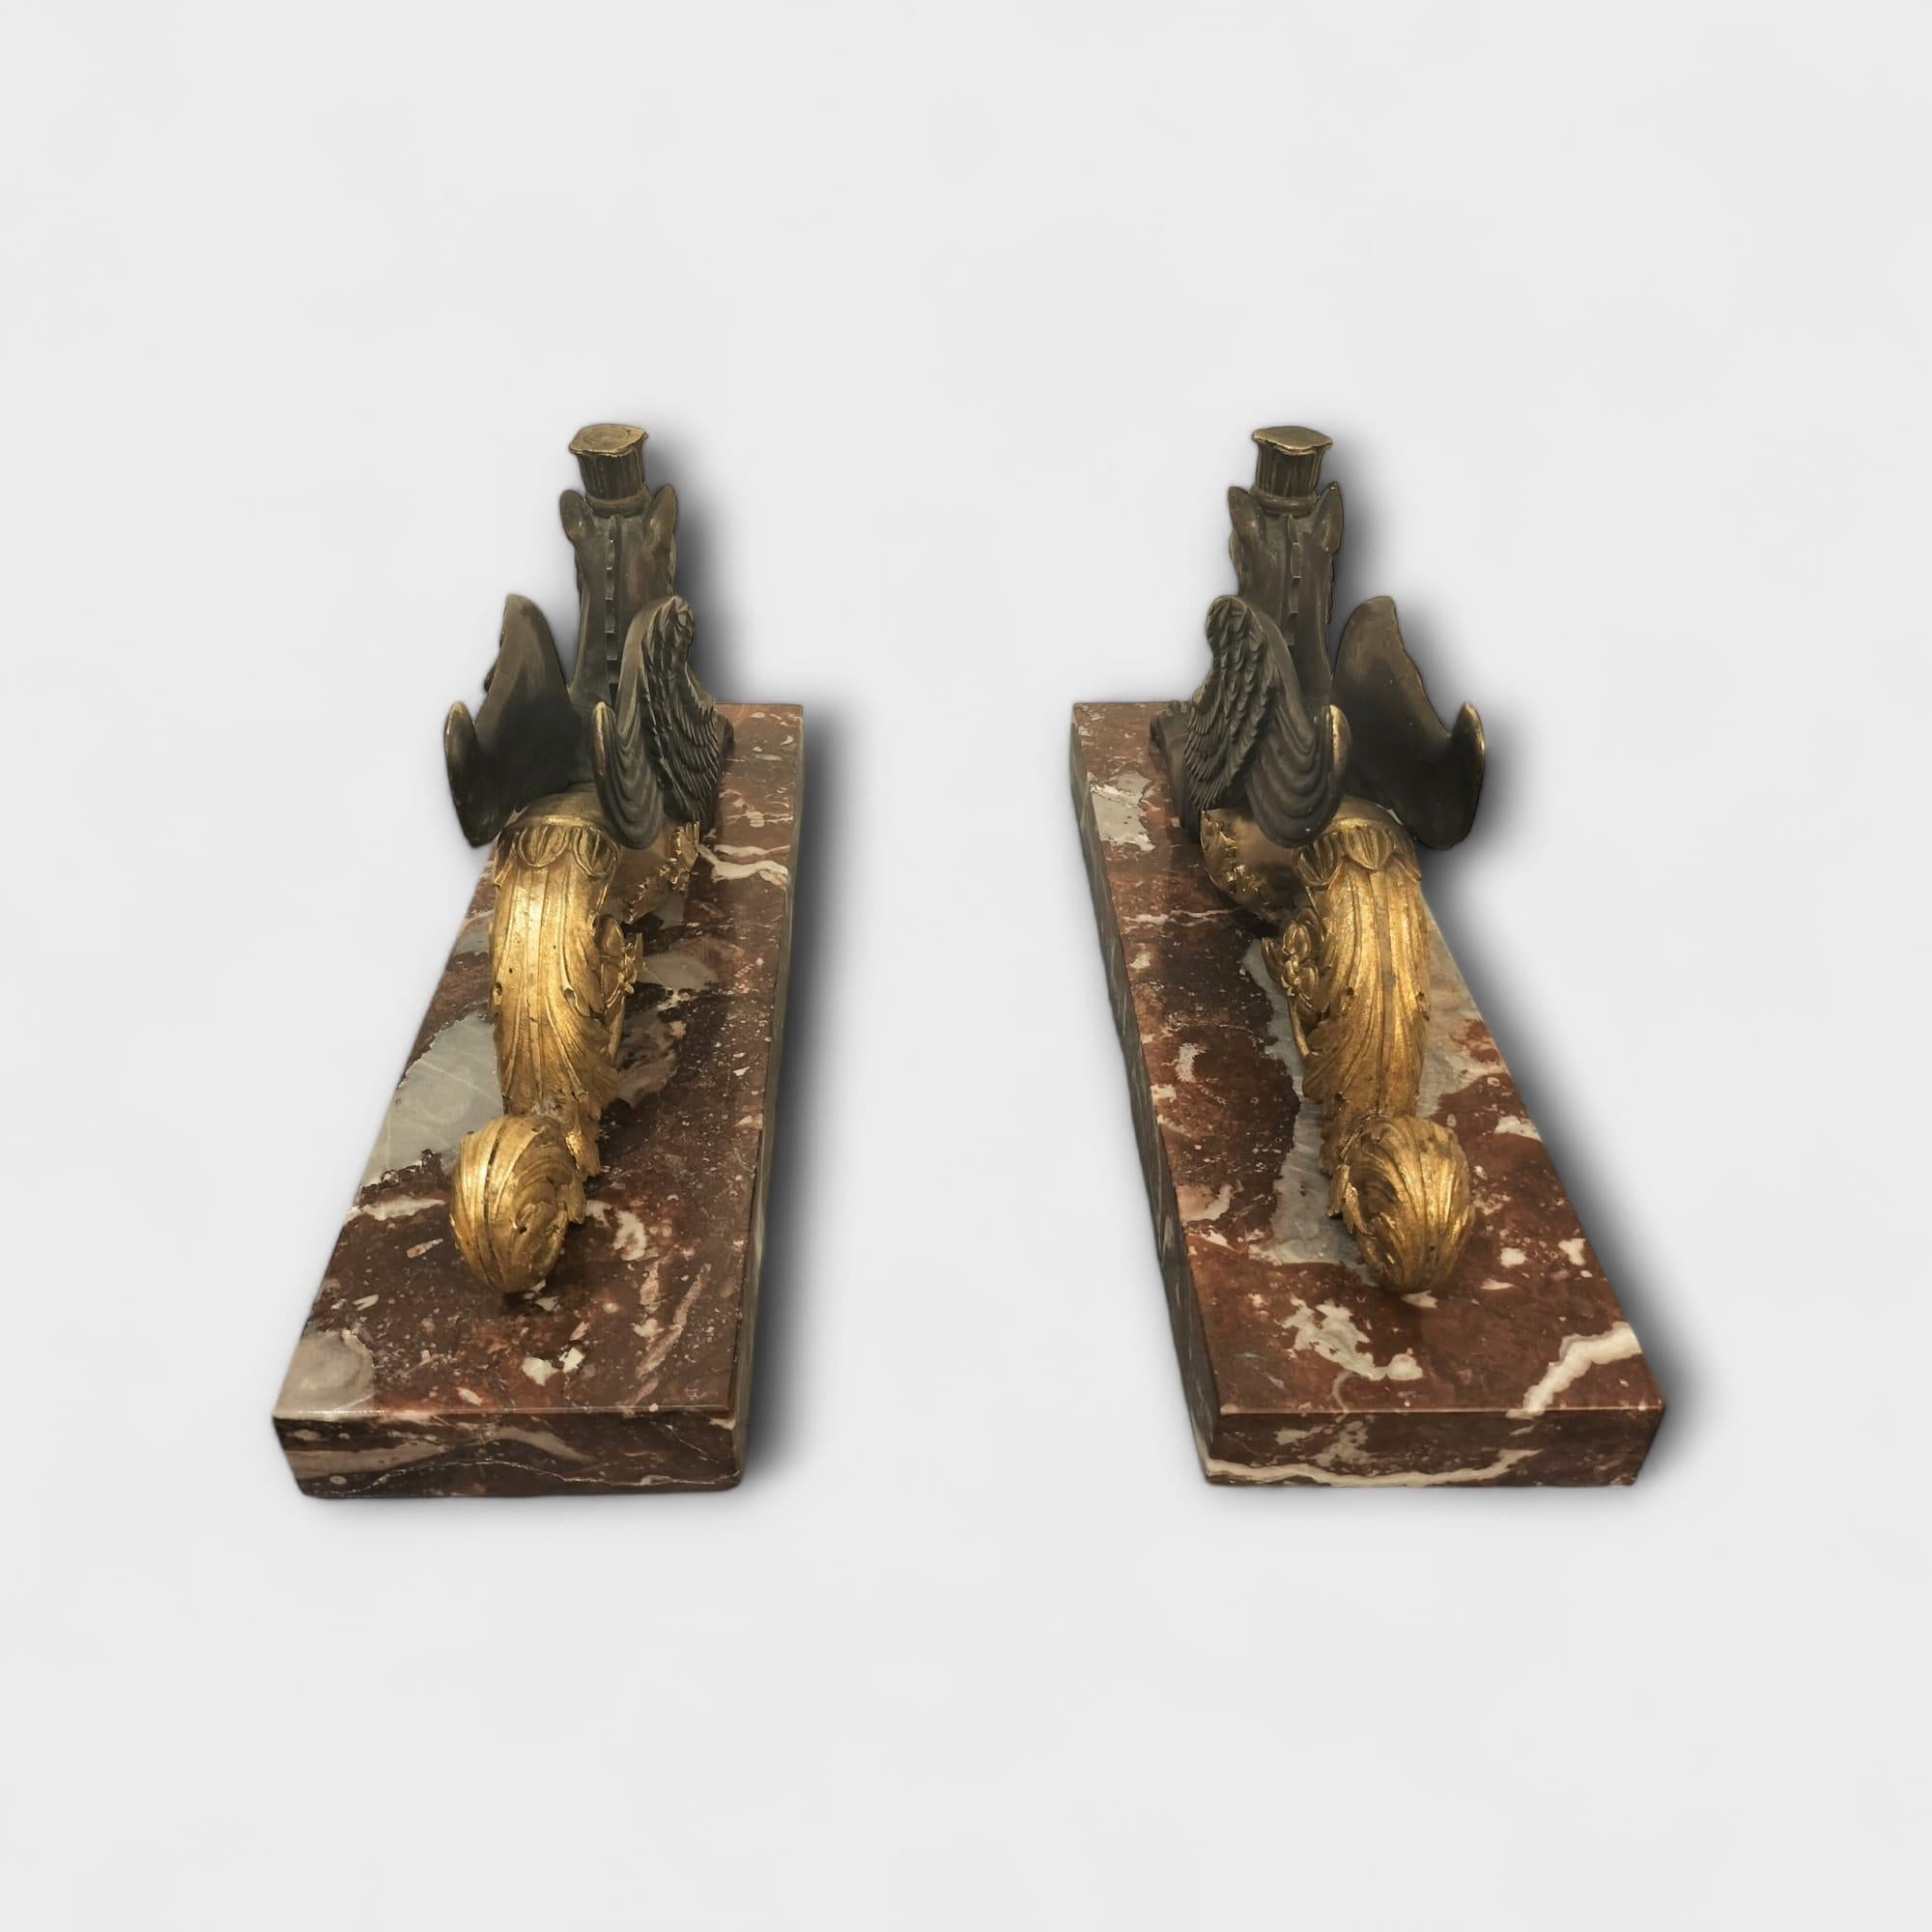 Napoleon III 19th Century Pair of Gilded Bronze Gryphon Statuettes Mounted on Marble For Sale